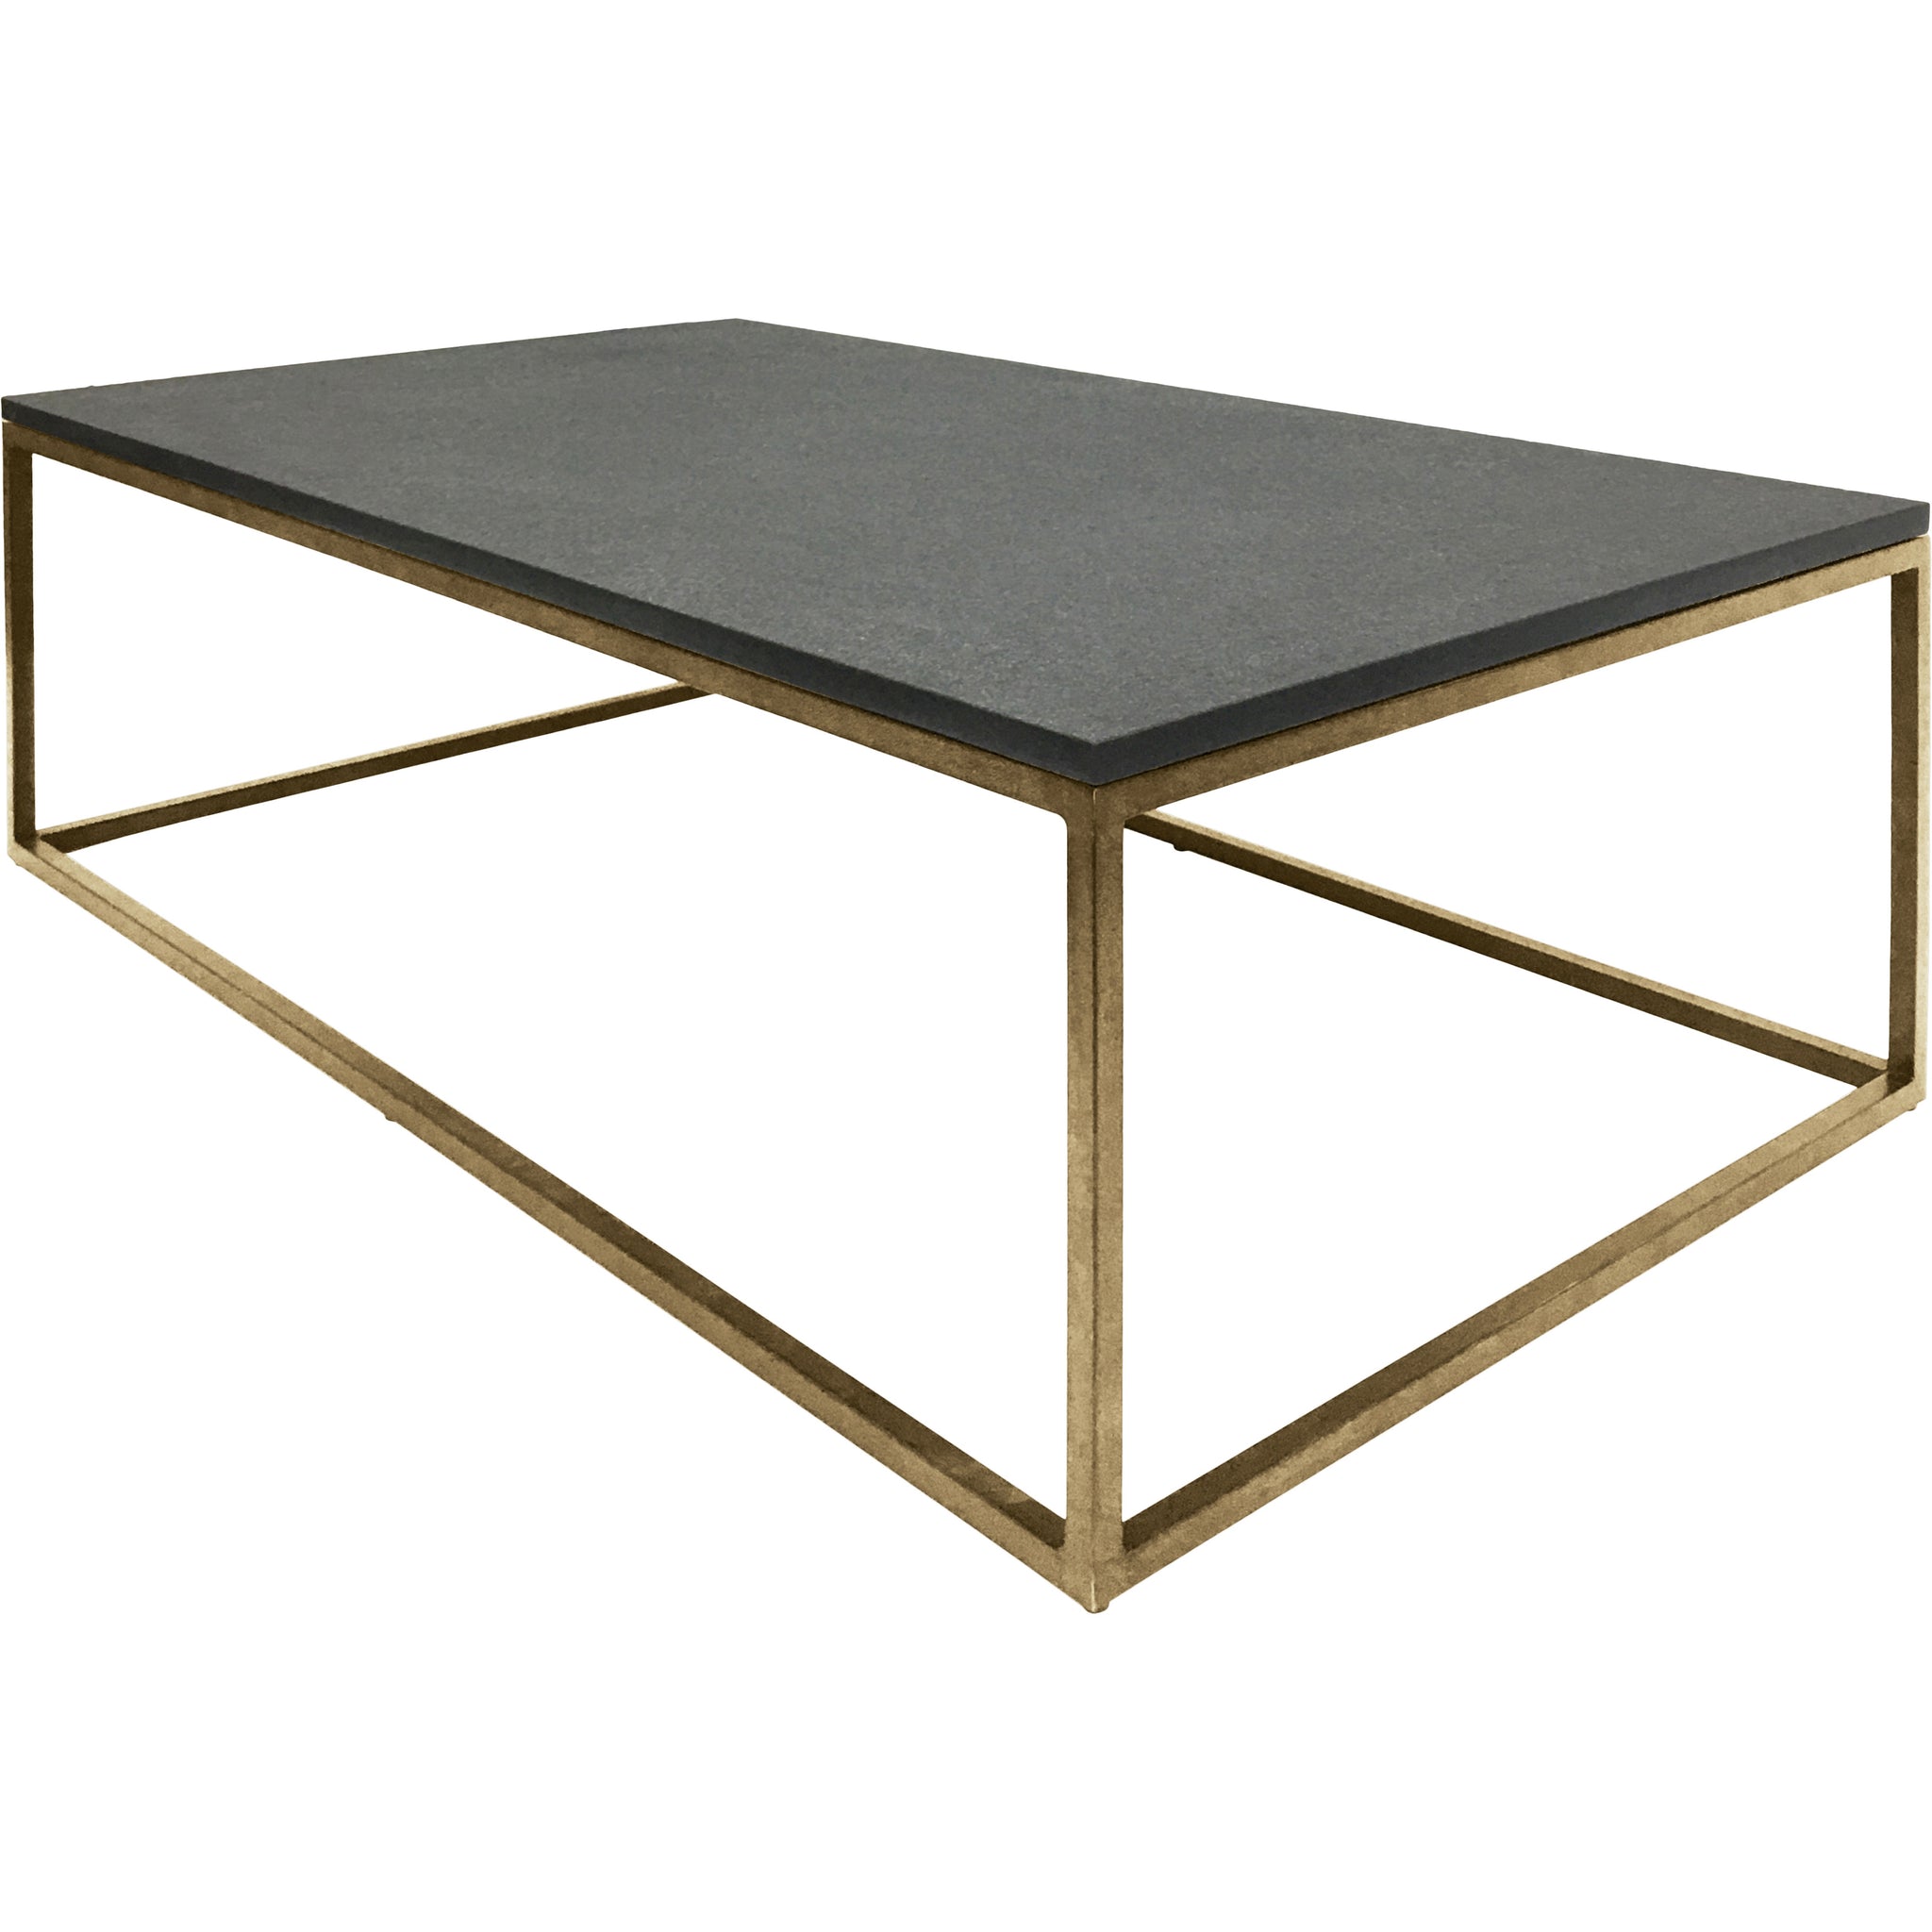 Forge Iron Coffee Table Aged Champagne Finish with Galaxy Slate Top Small 12